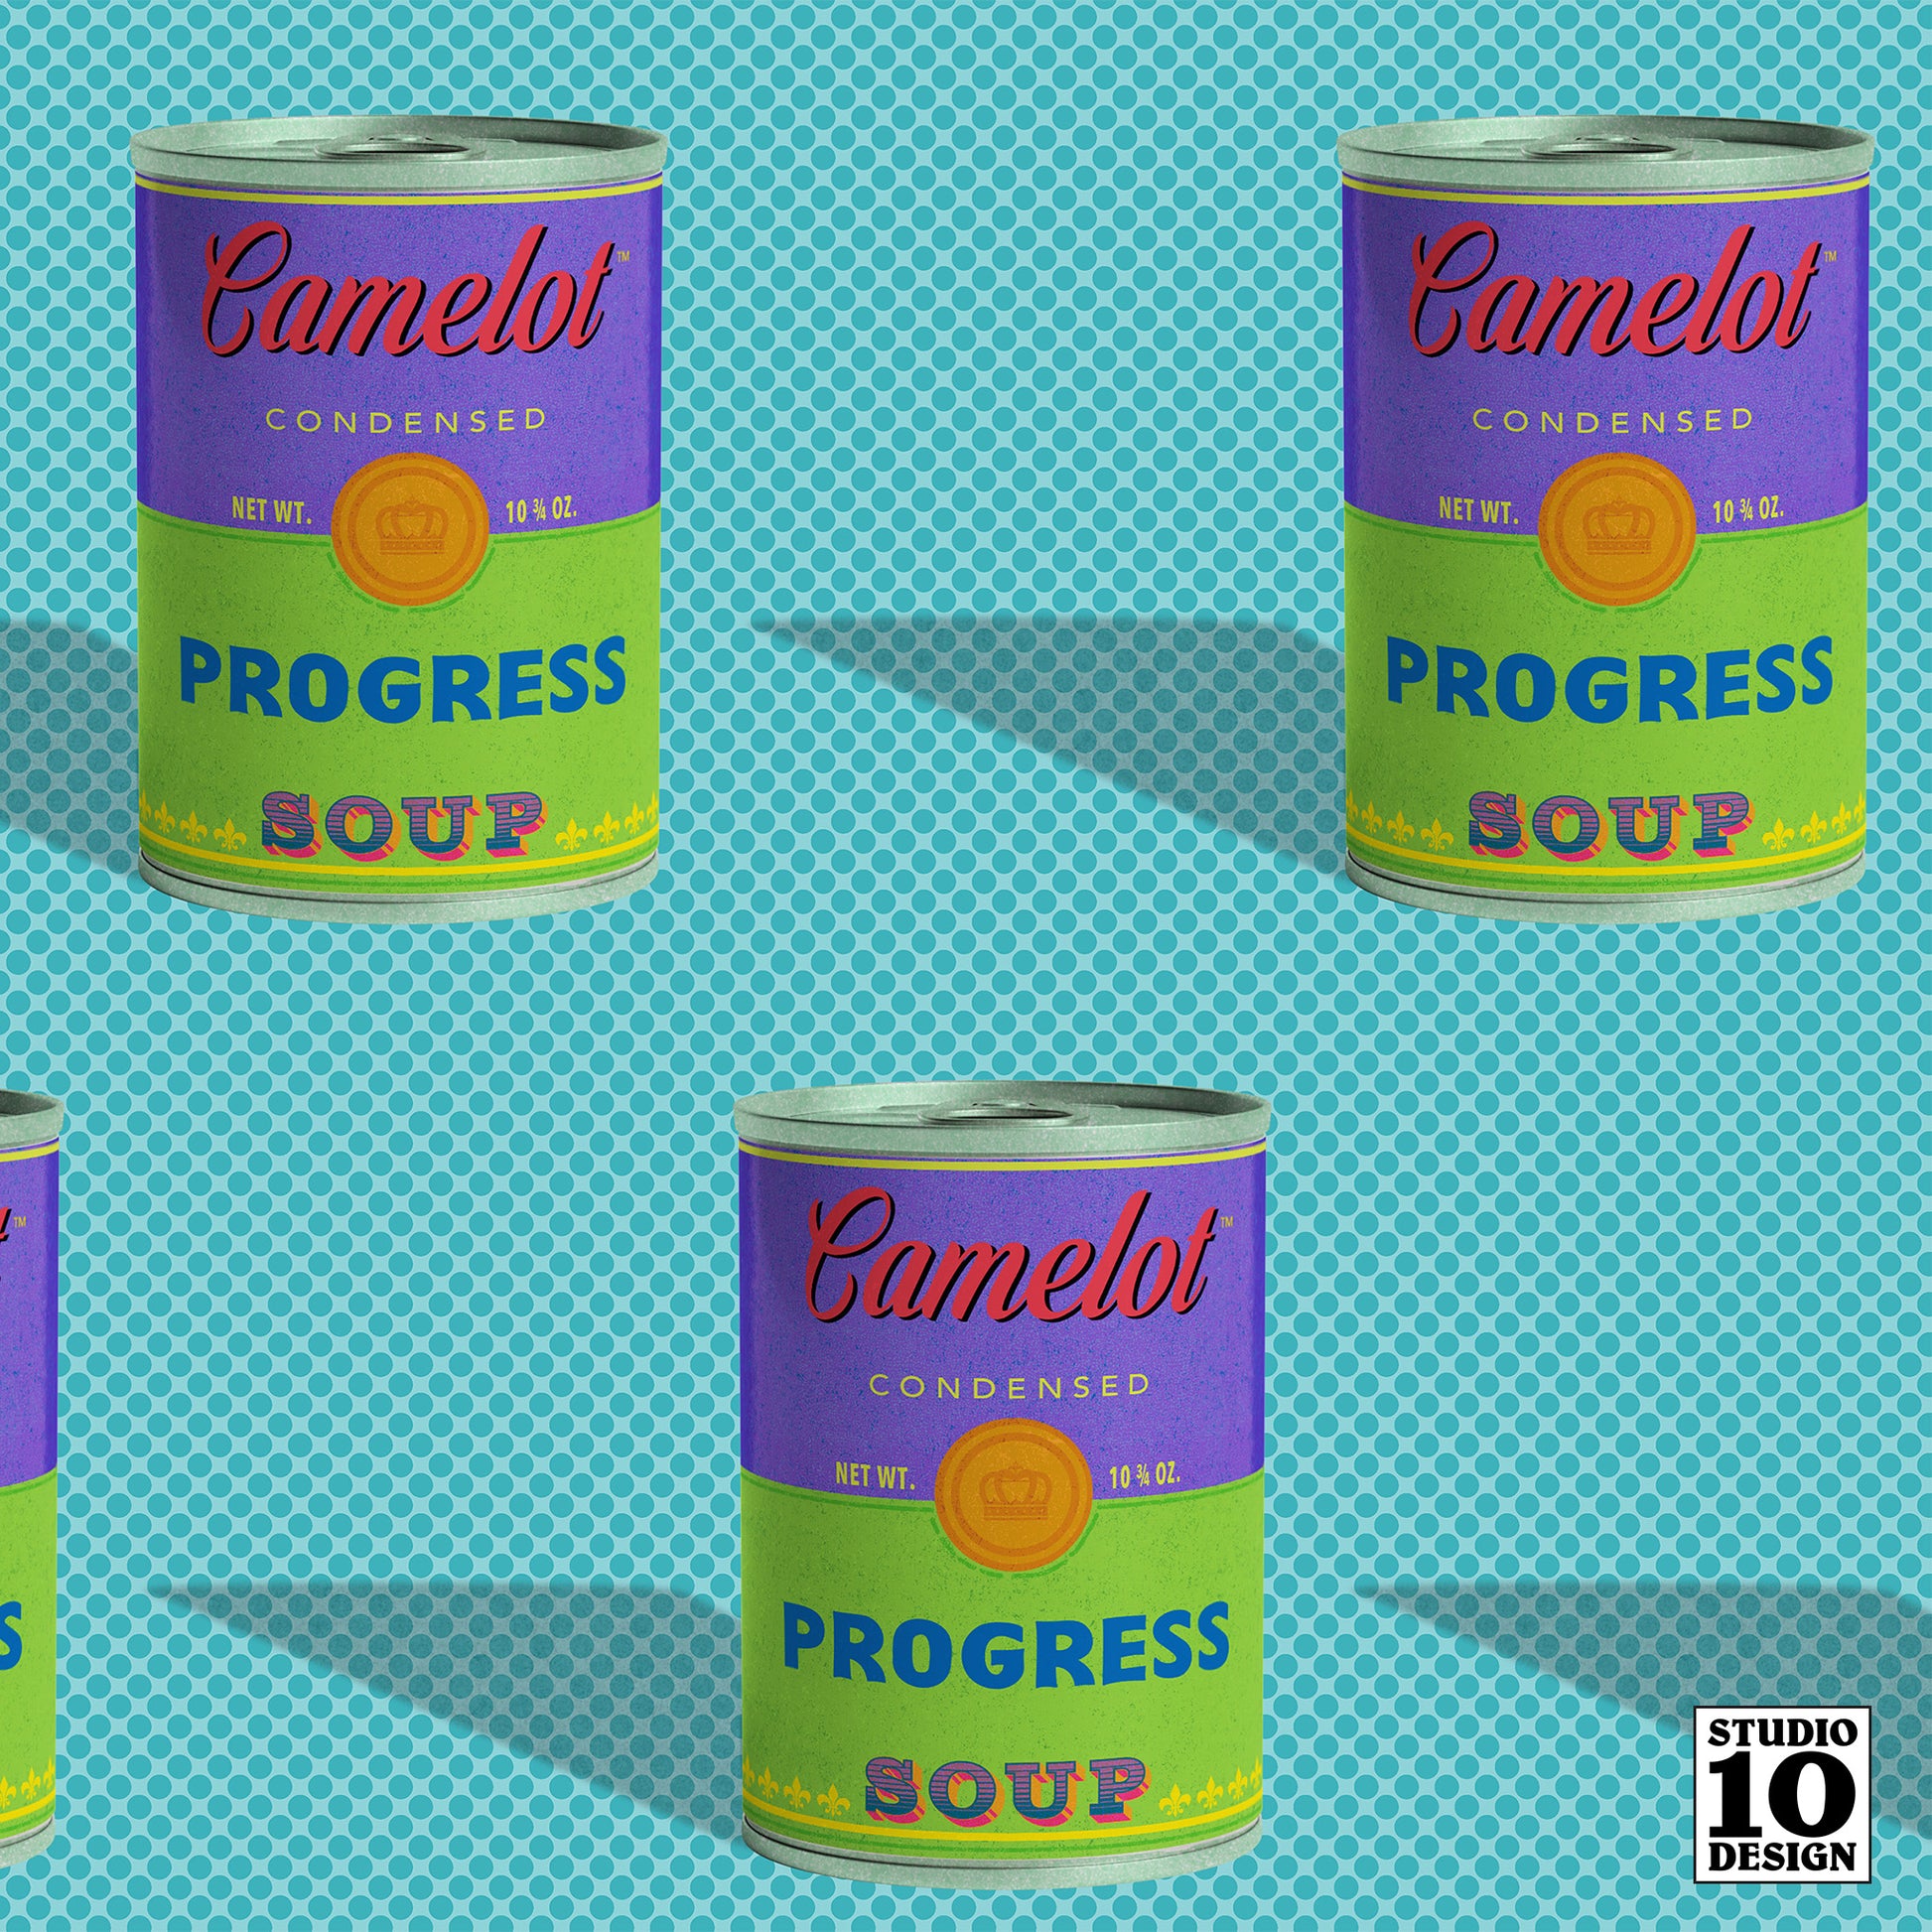 Progress Soup Cans Printed Fabric by Studio Ten Design